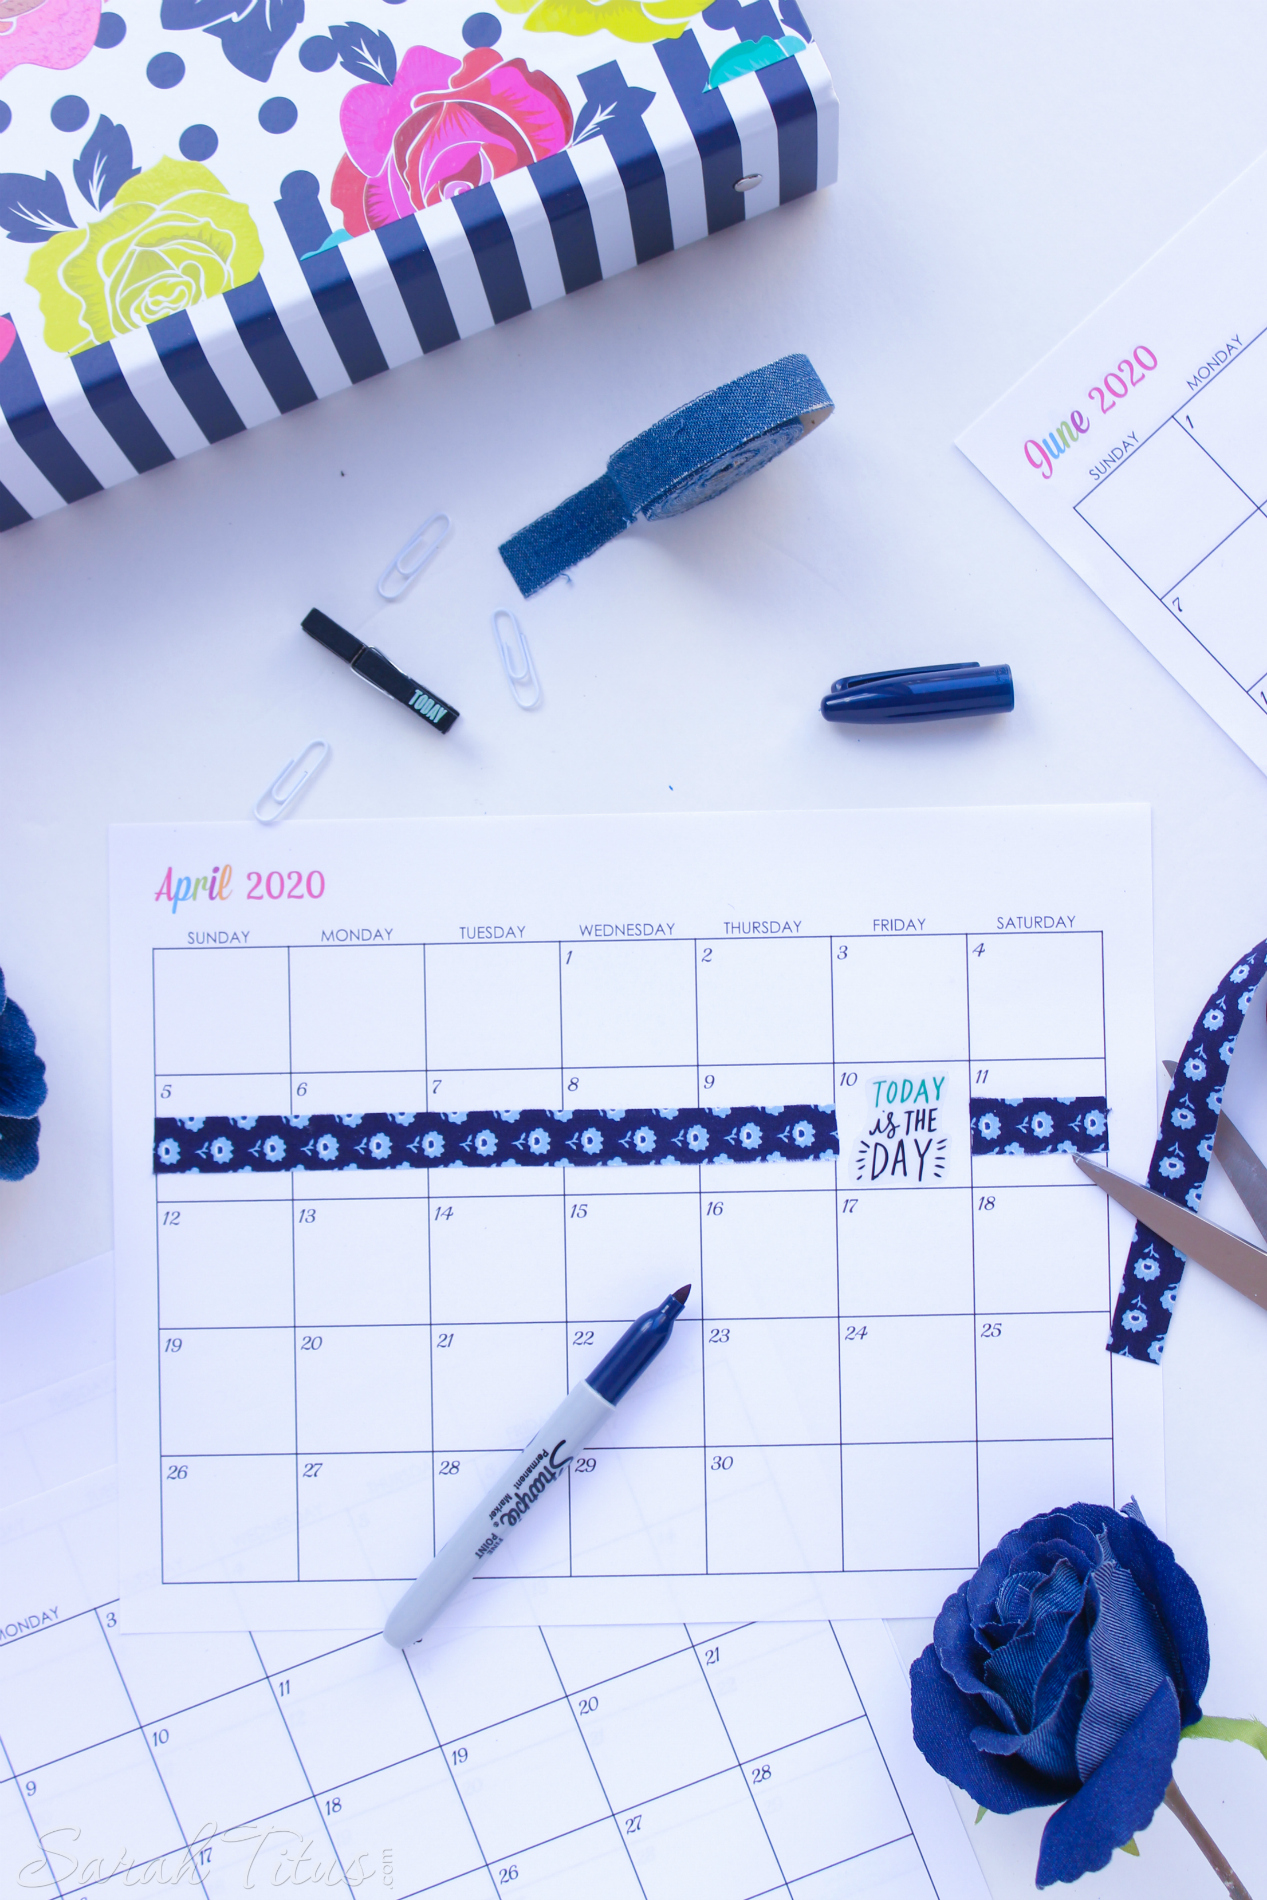 Free Printable 2020 Calendars - Completely editable online!!! Use them for menu planning, homeschooling, blogging, or just to organize your life.